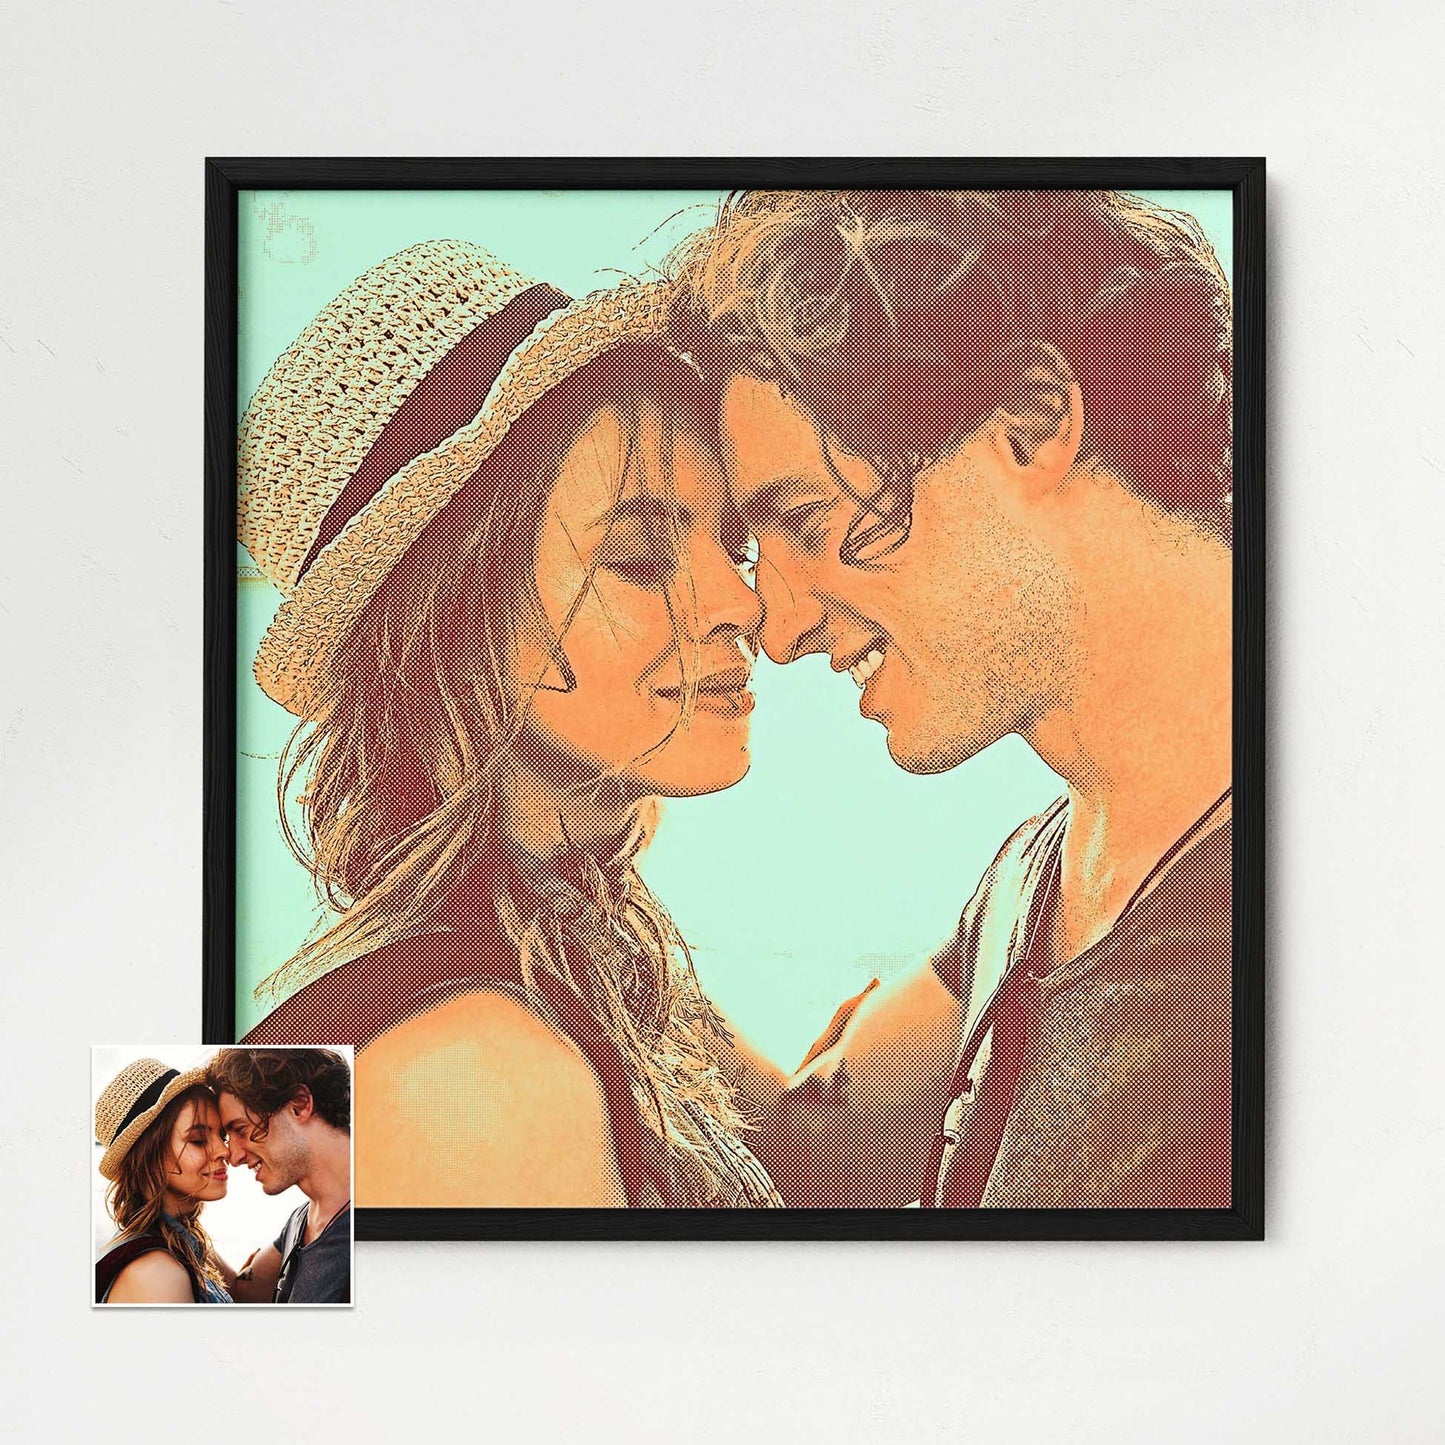 Add a touch of creativity to your home decor with a Personalised Crosshatch Drawing Framed Print. The vivid and colorful rendition of your photo, with its pencil effect and unique crosshatch texture, transforms it into a one-of-a-kind art